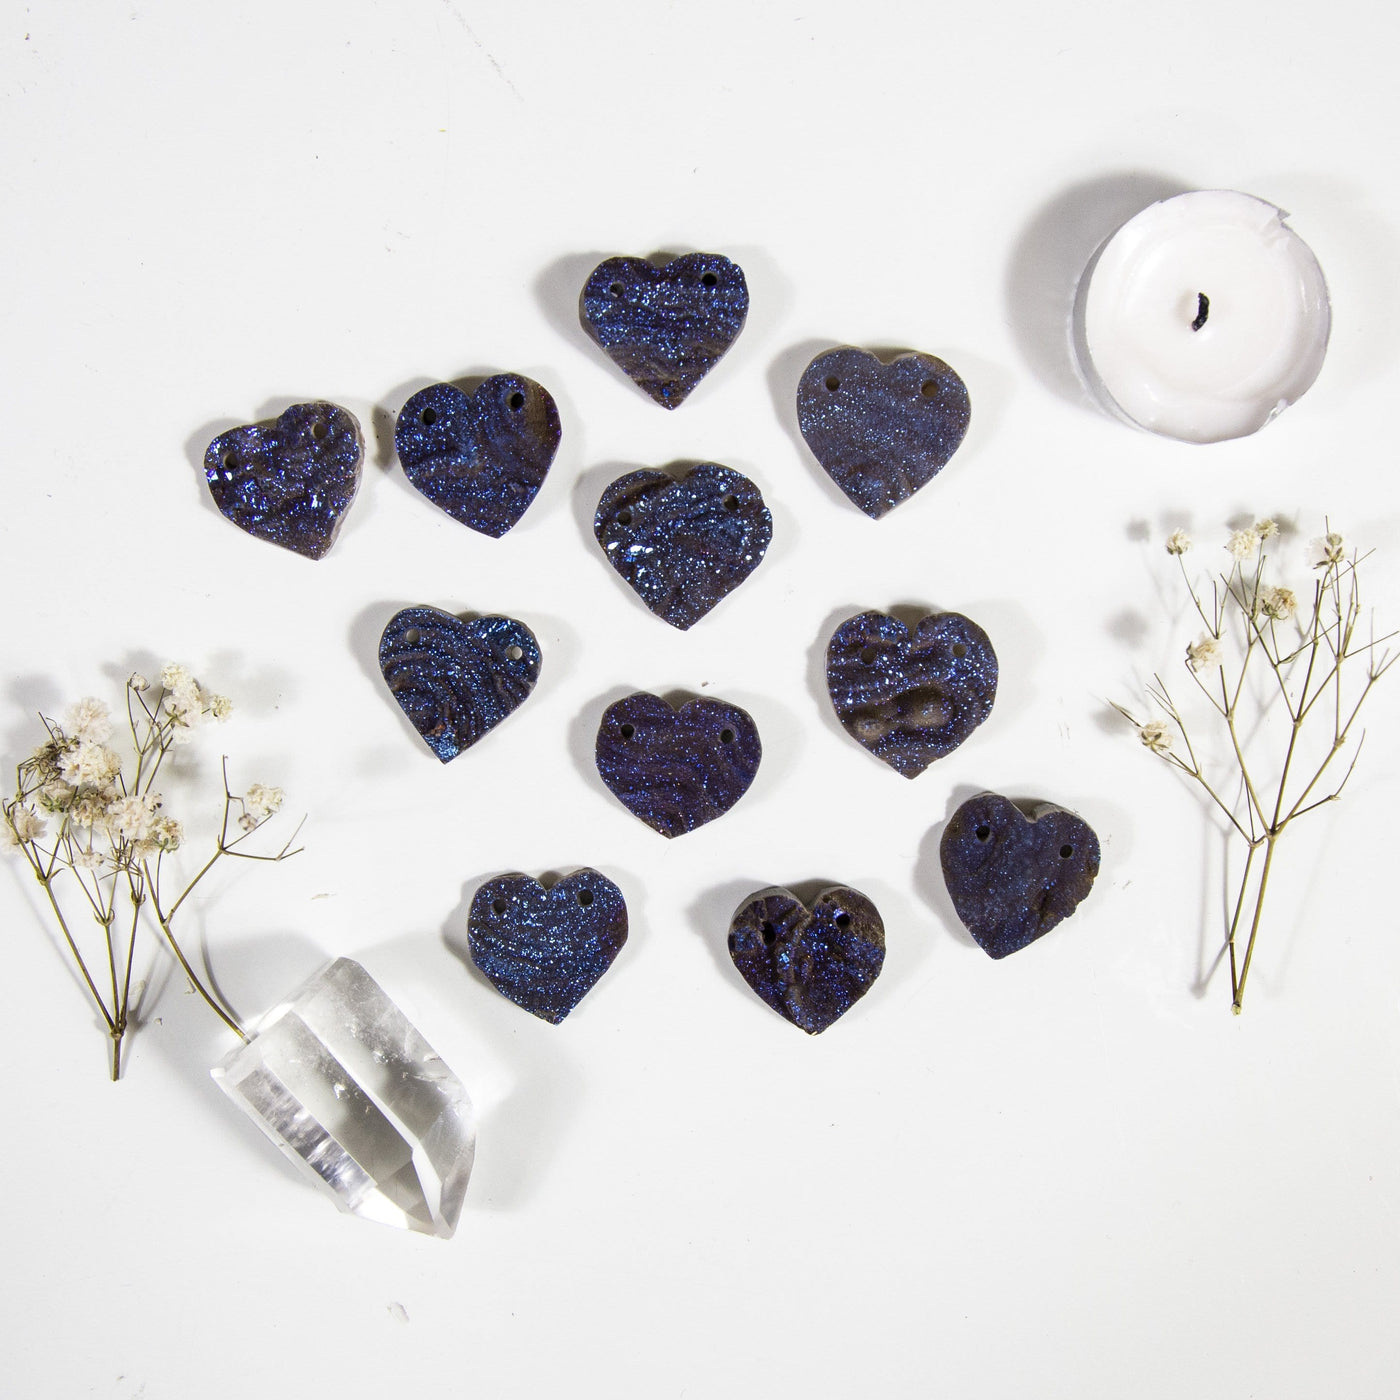 11 Chalcedony Heart Titanium Coated Blue double drilled beads on white background with decorations